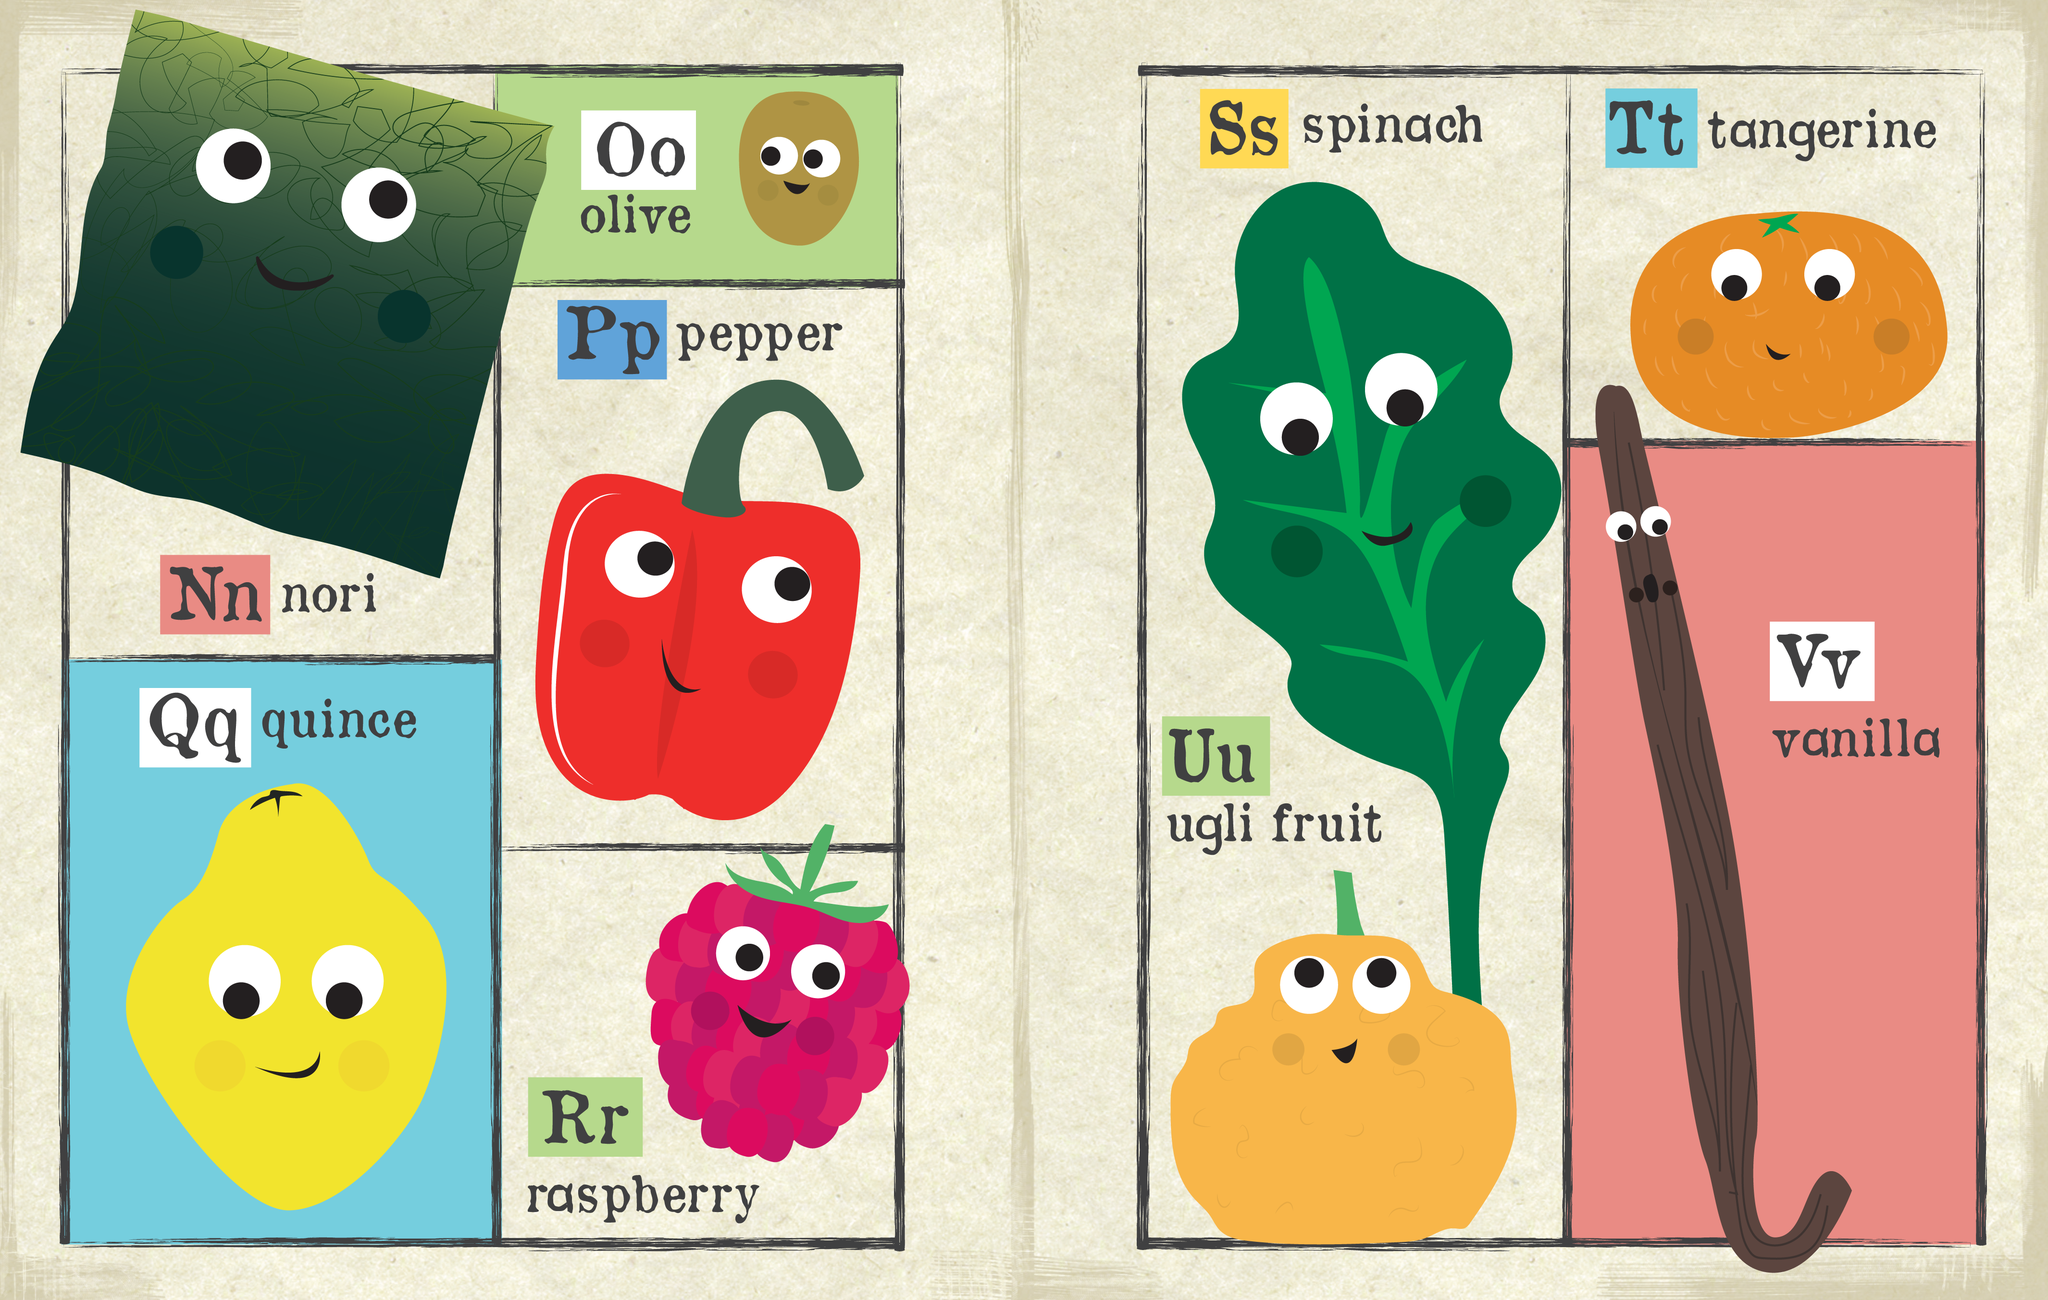 Crinkly Cloth Newspaper - A to Z Fruit & Veg